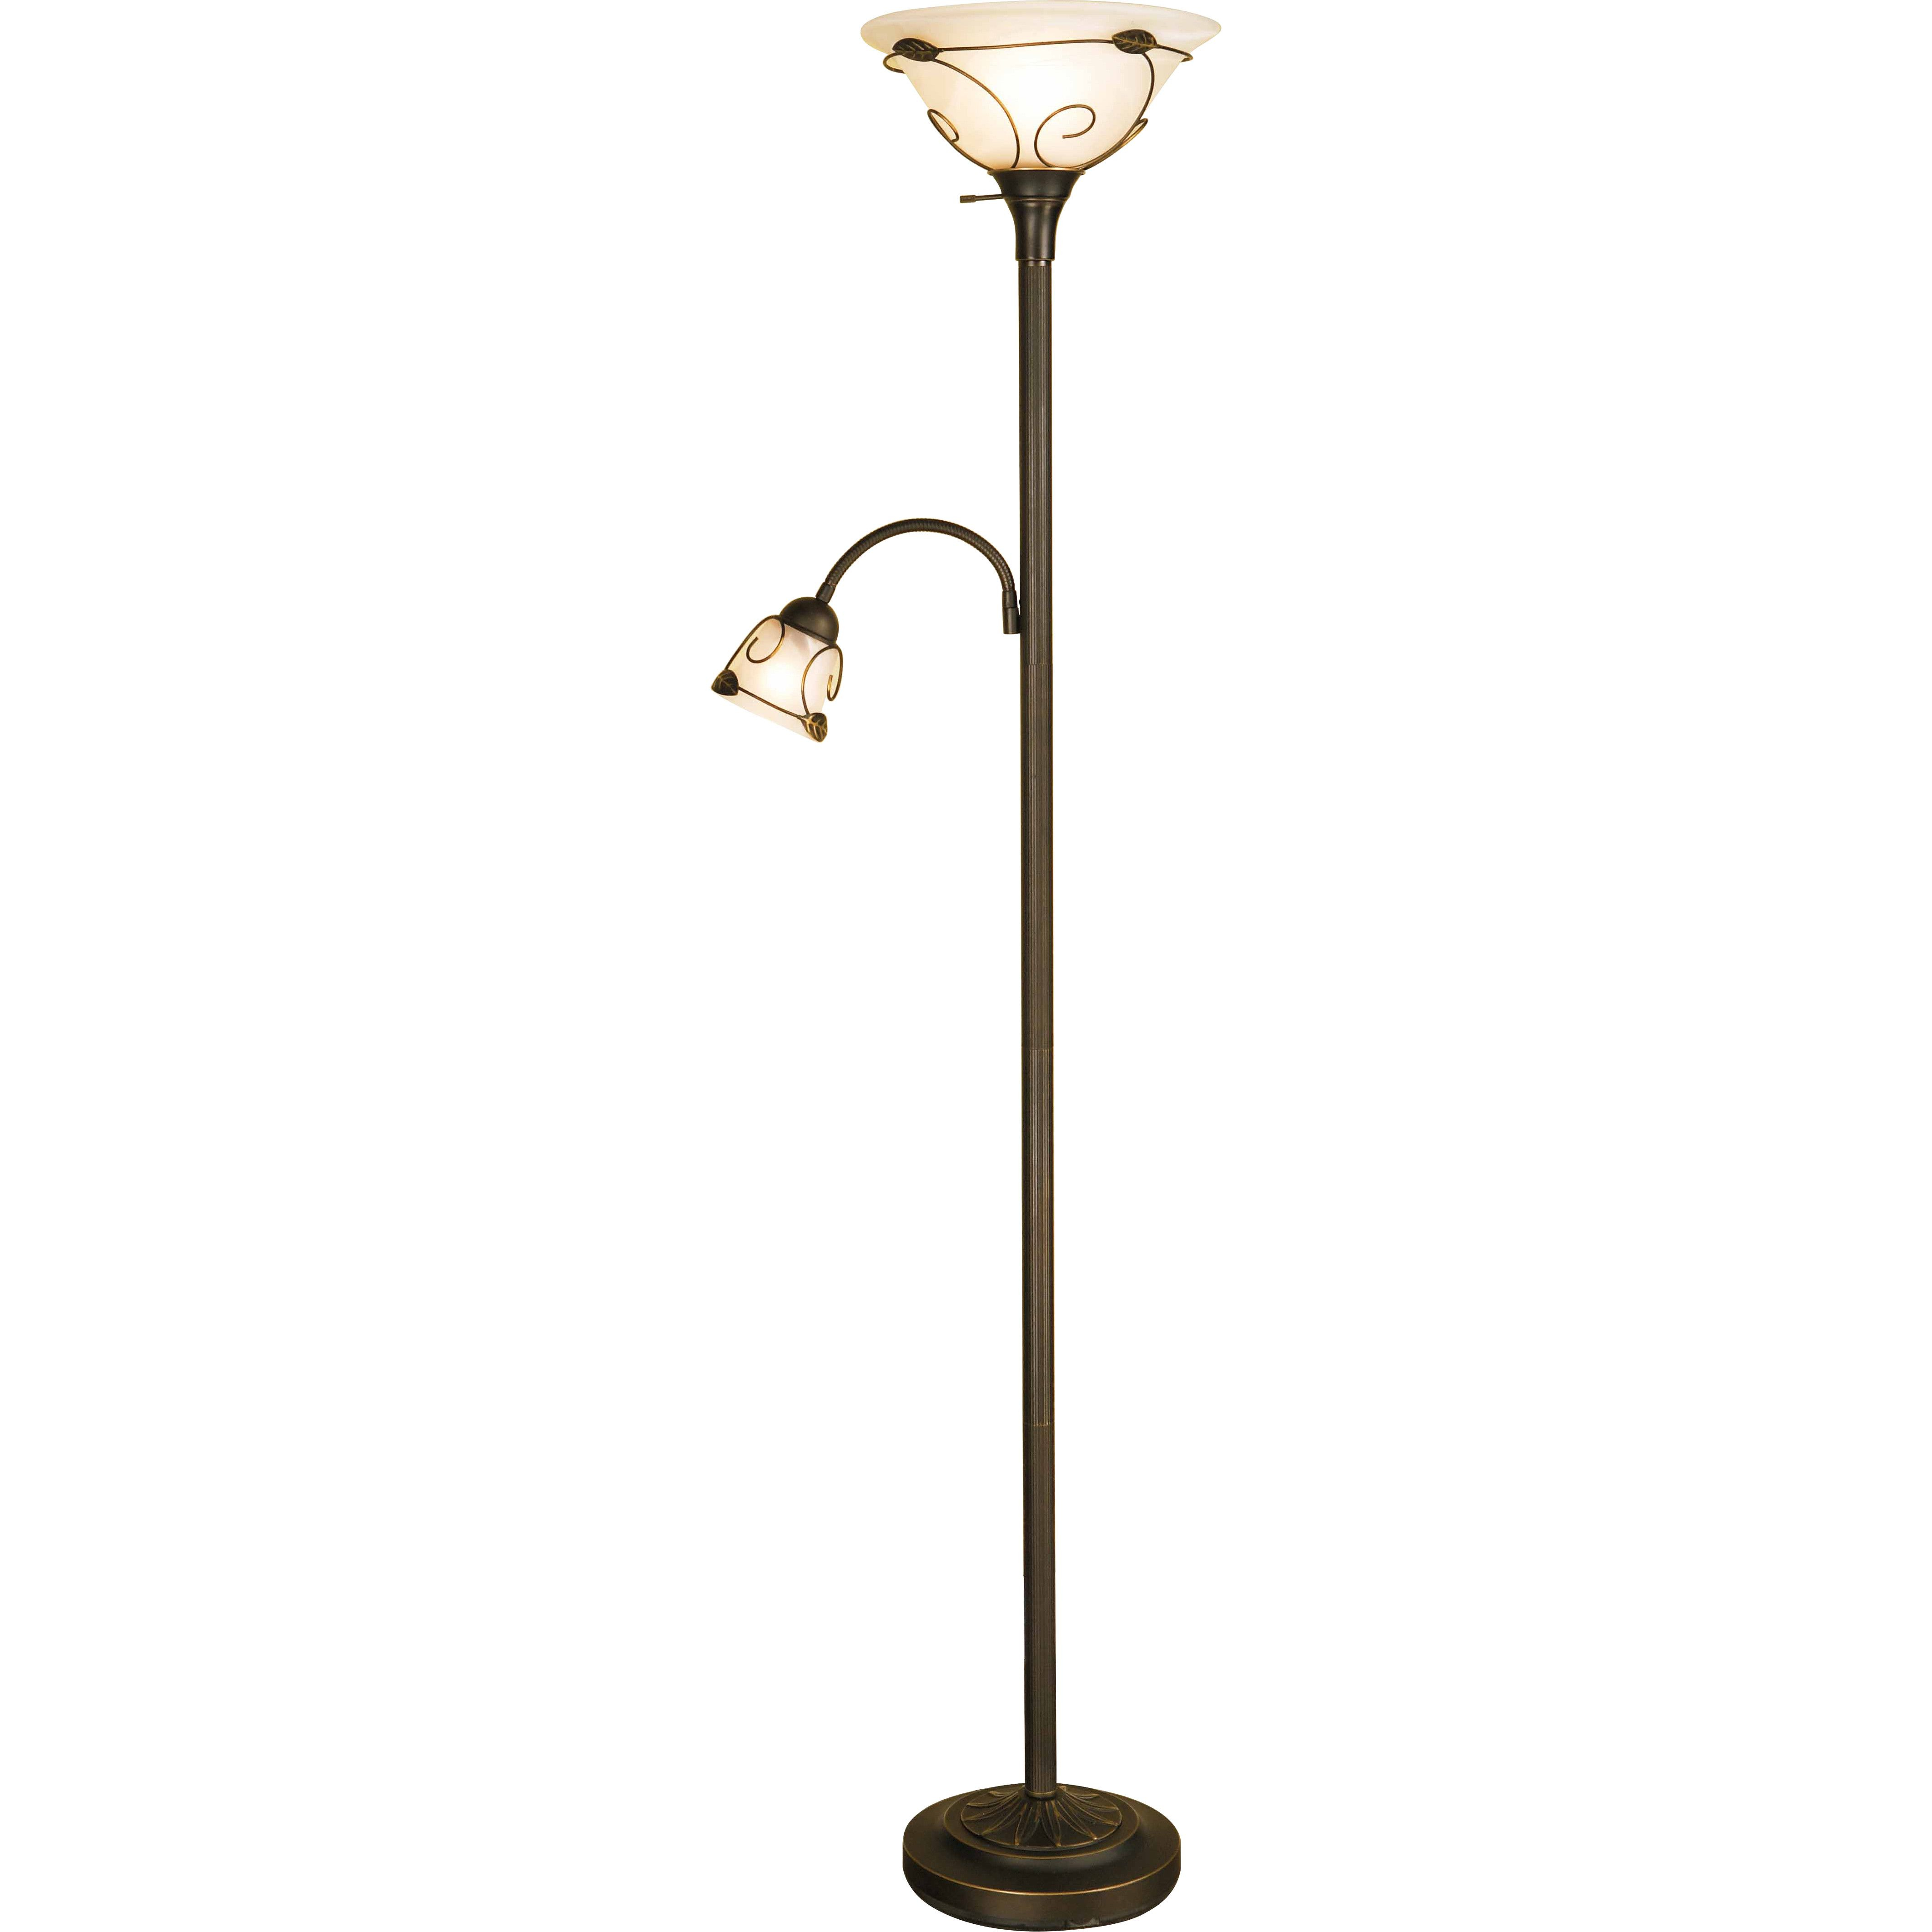 Rosalind Wheeler Mcelhannon 71 Torchiere Floor Lamp Floor throughout sizing 4248 X 4248